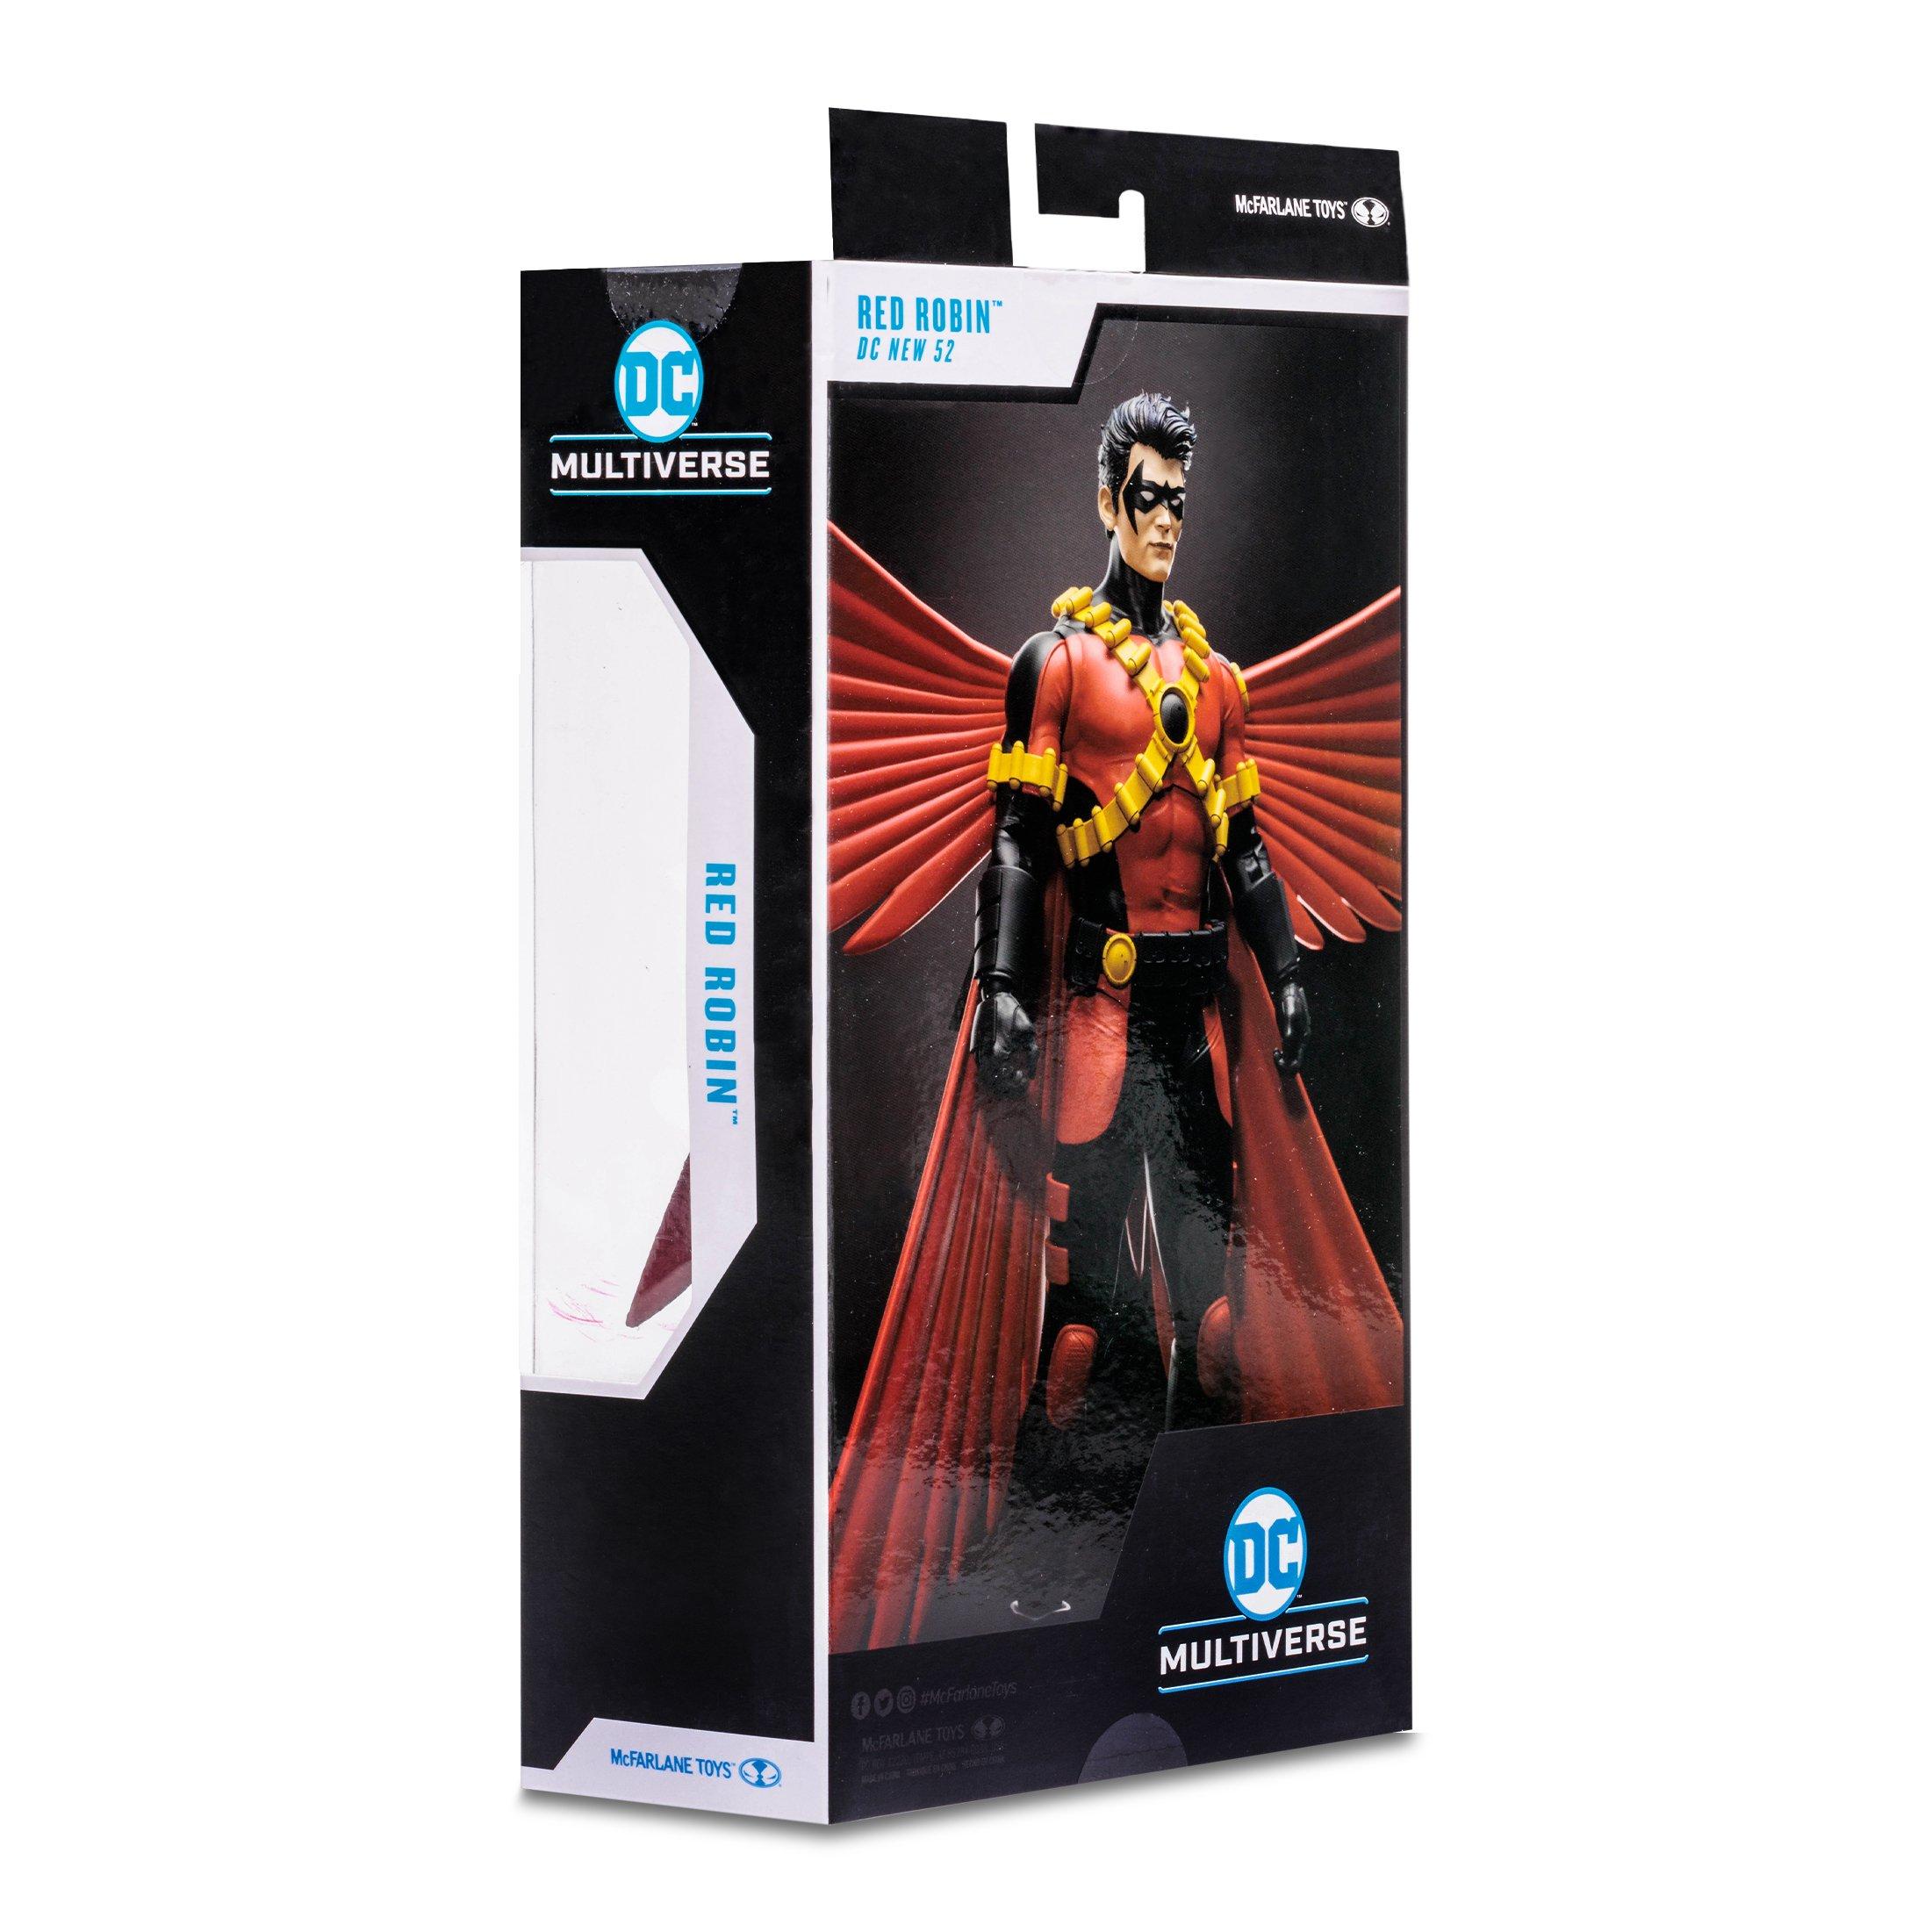 McFarlane Toys DC Multiverse The New 52 Red Robin 7-in Action Figure